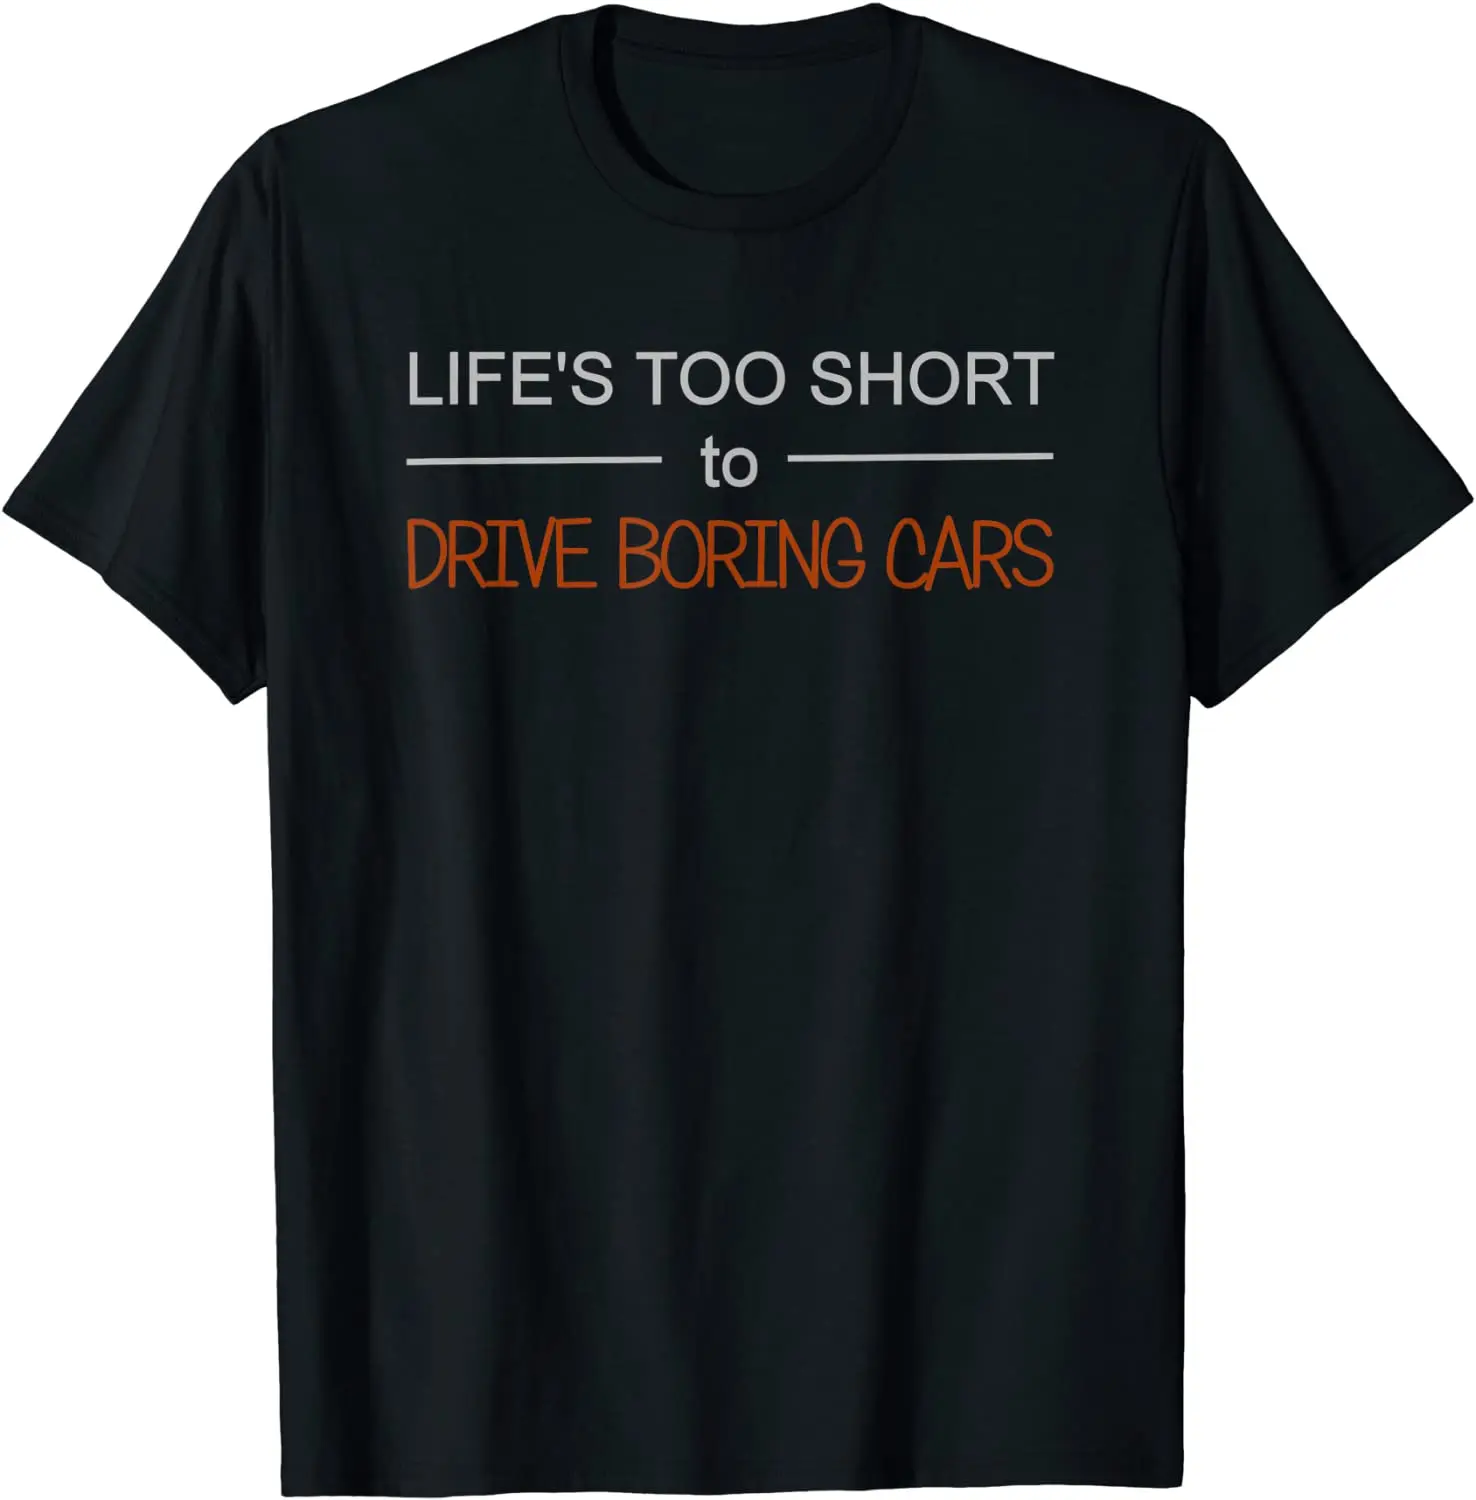 

Funny Car T-shirt Life's Too Short To Drive Boring Cars Letter Print Men Tshirt Male Cotton Tees Gift for Automotive Enthusiast